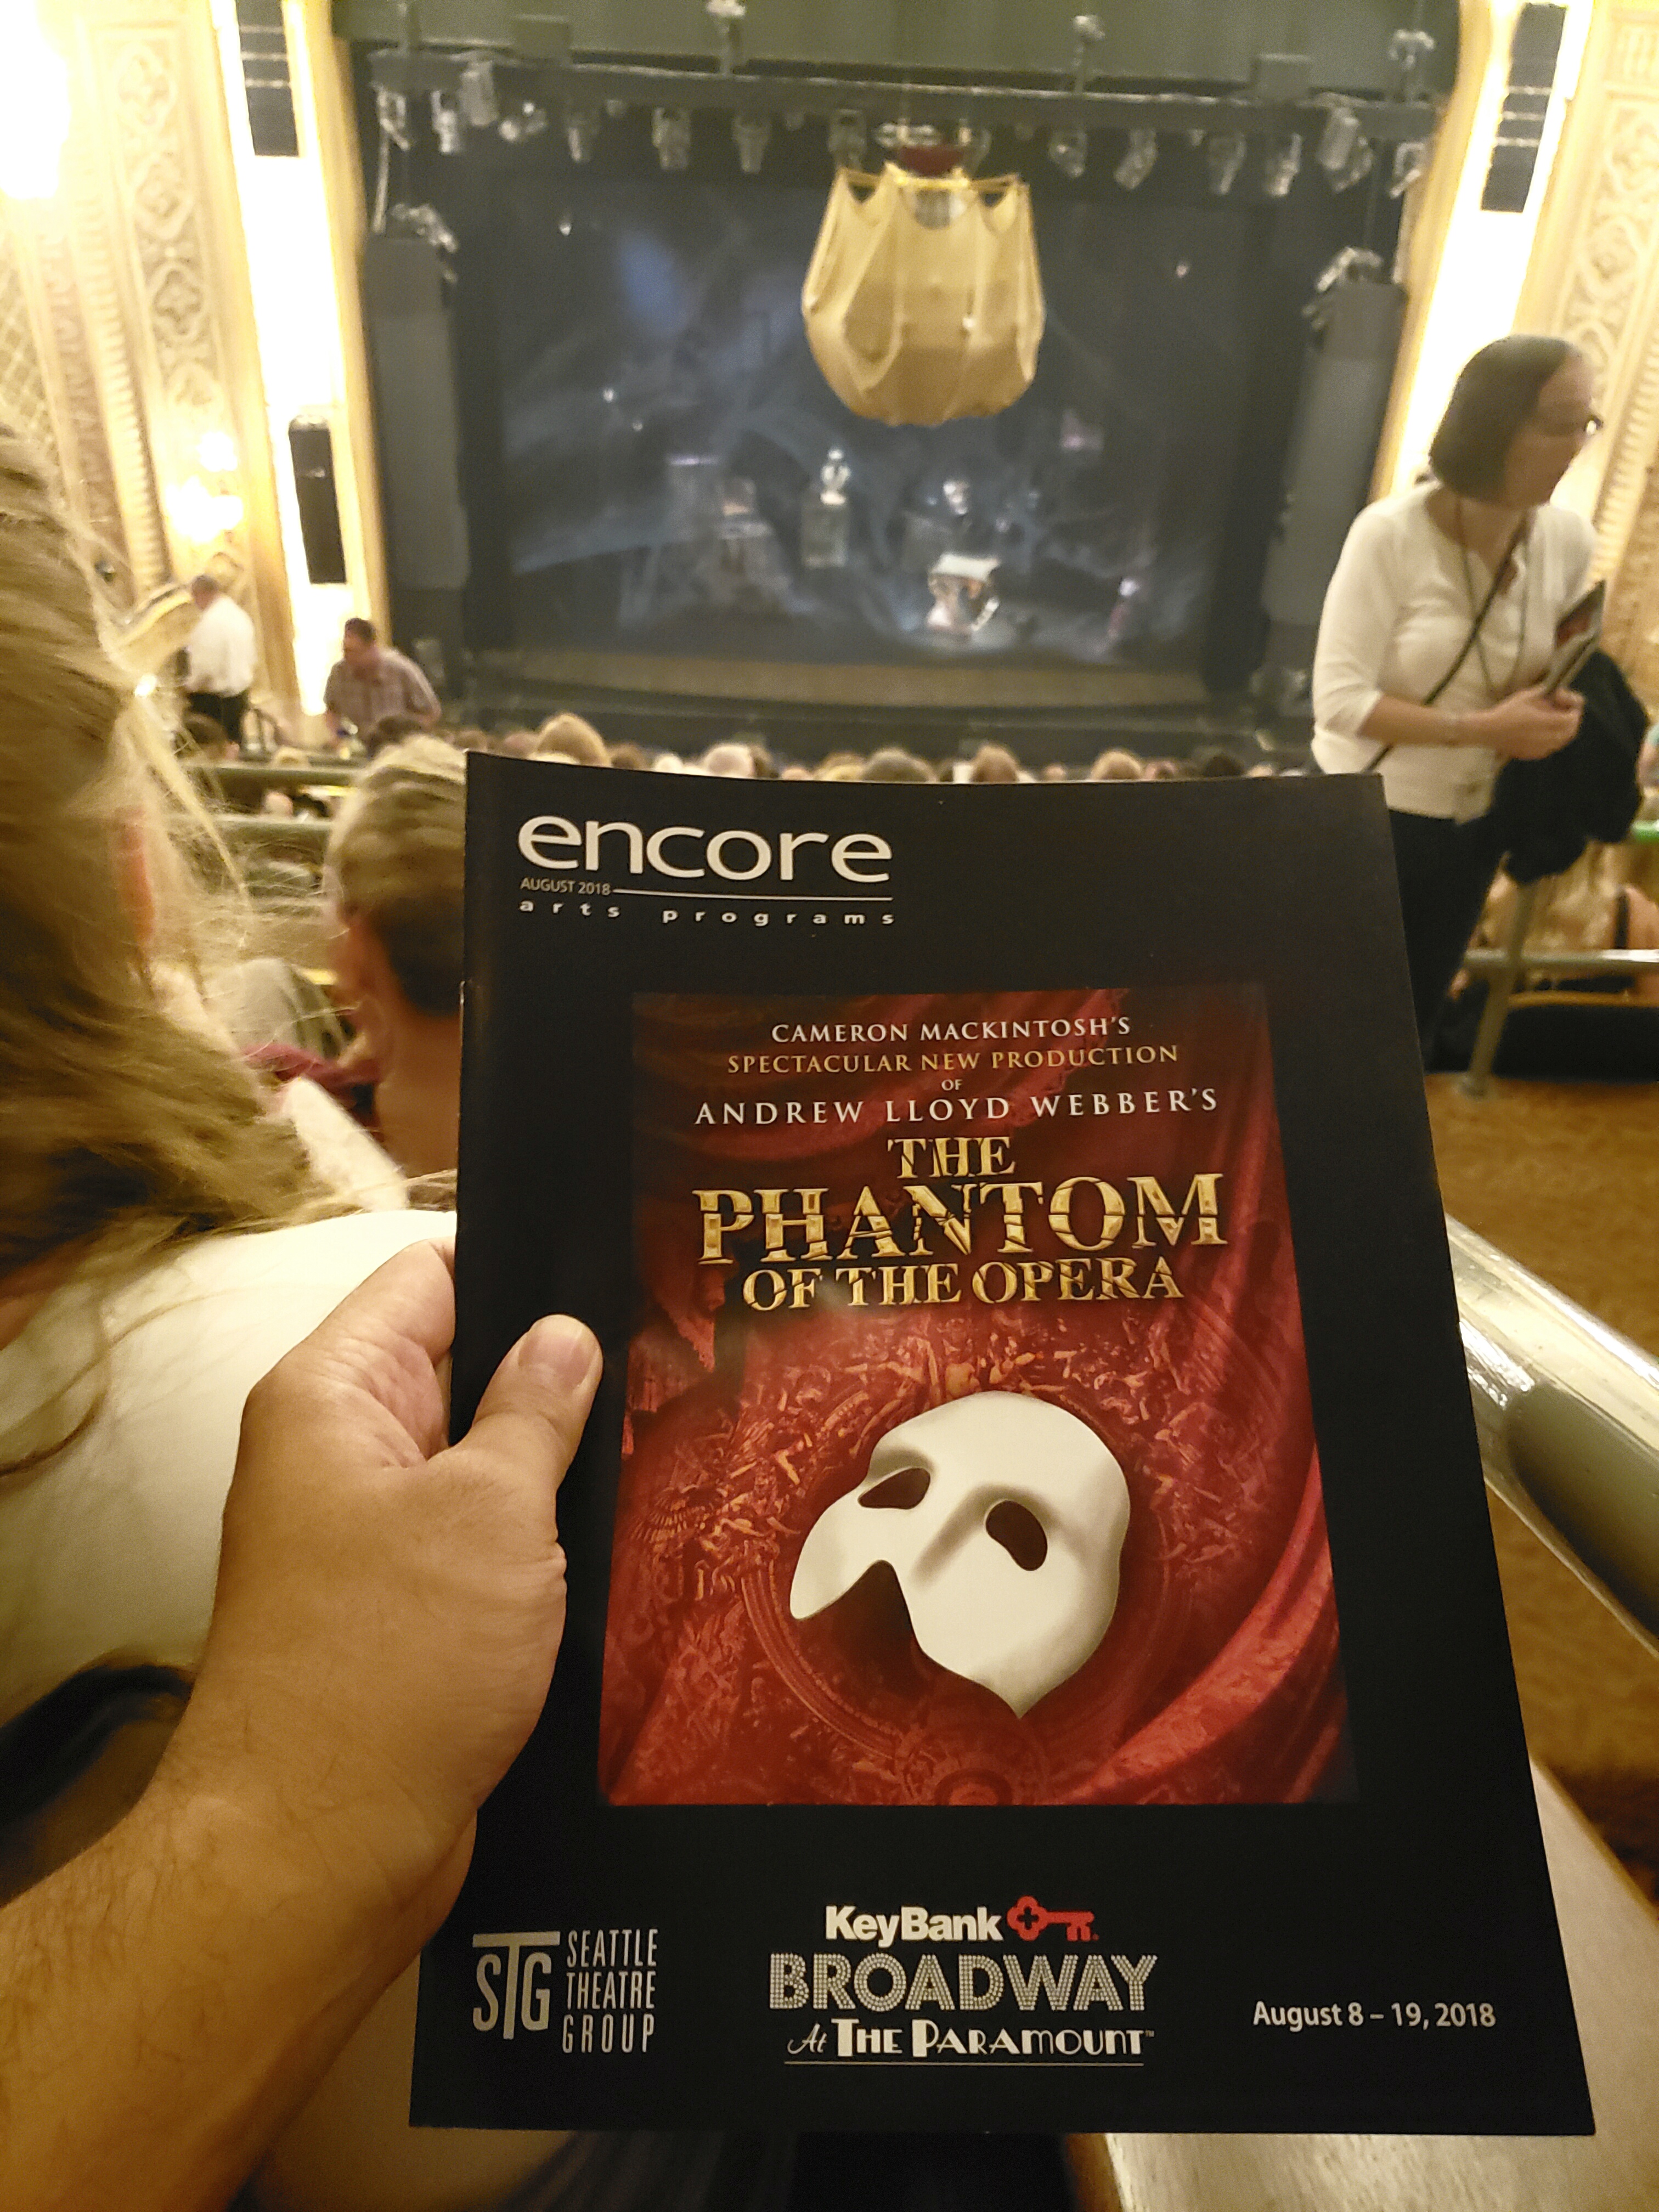 Second time watching The Phantom of the Opera. Didn't connect the dark 